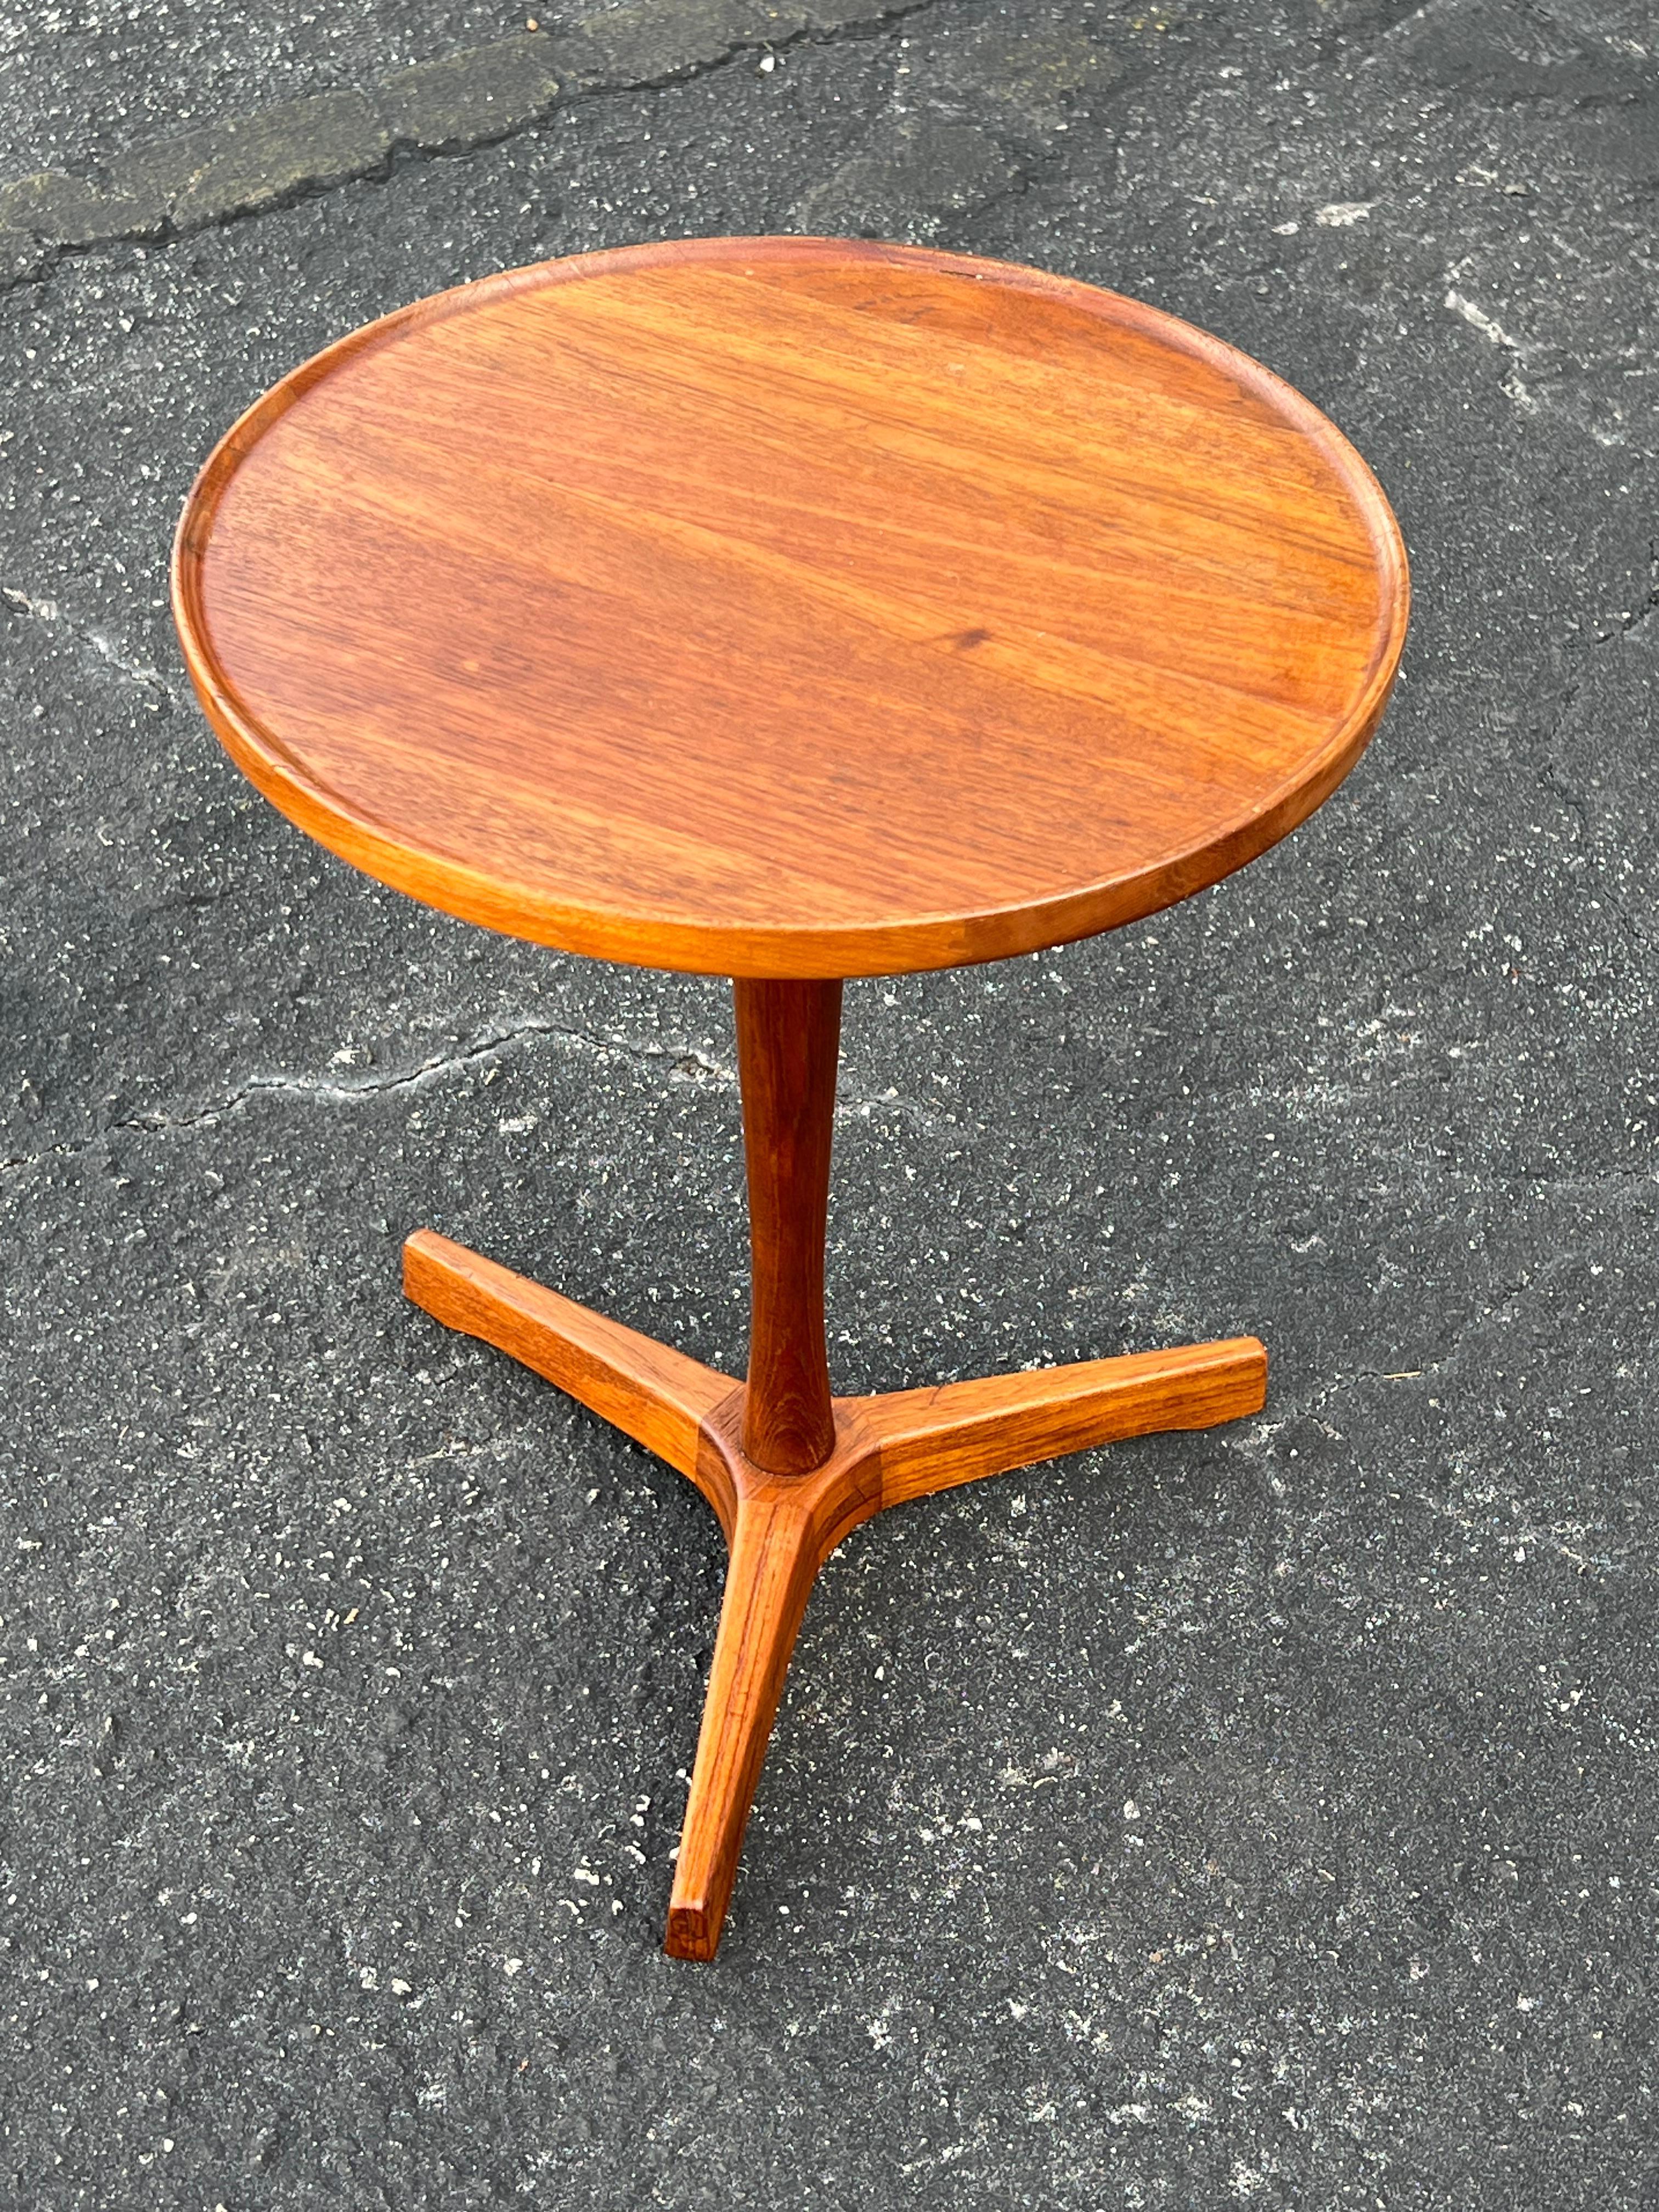 A classic Danish side table with three legs by Hans Andersen. Round top in original  teak wood. Nice patina and very good condition. Signed underneath.